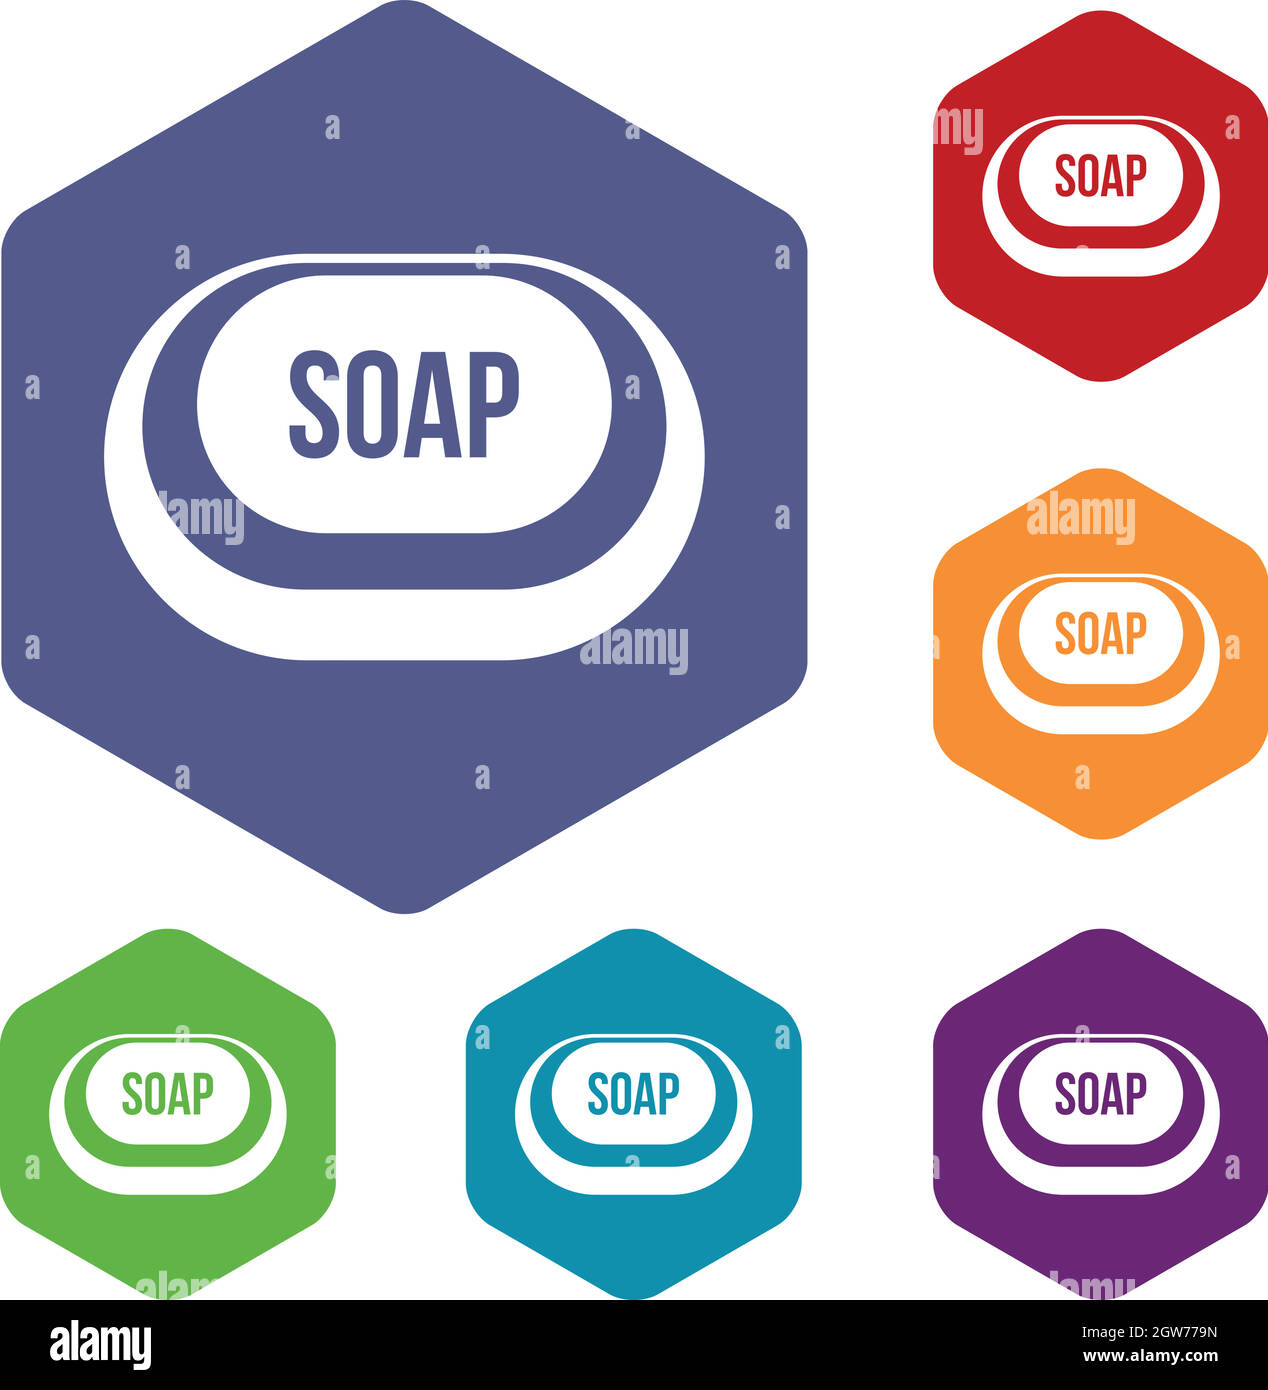 Soap icons set Stock Vector